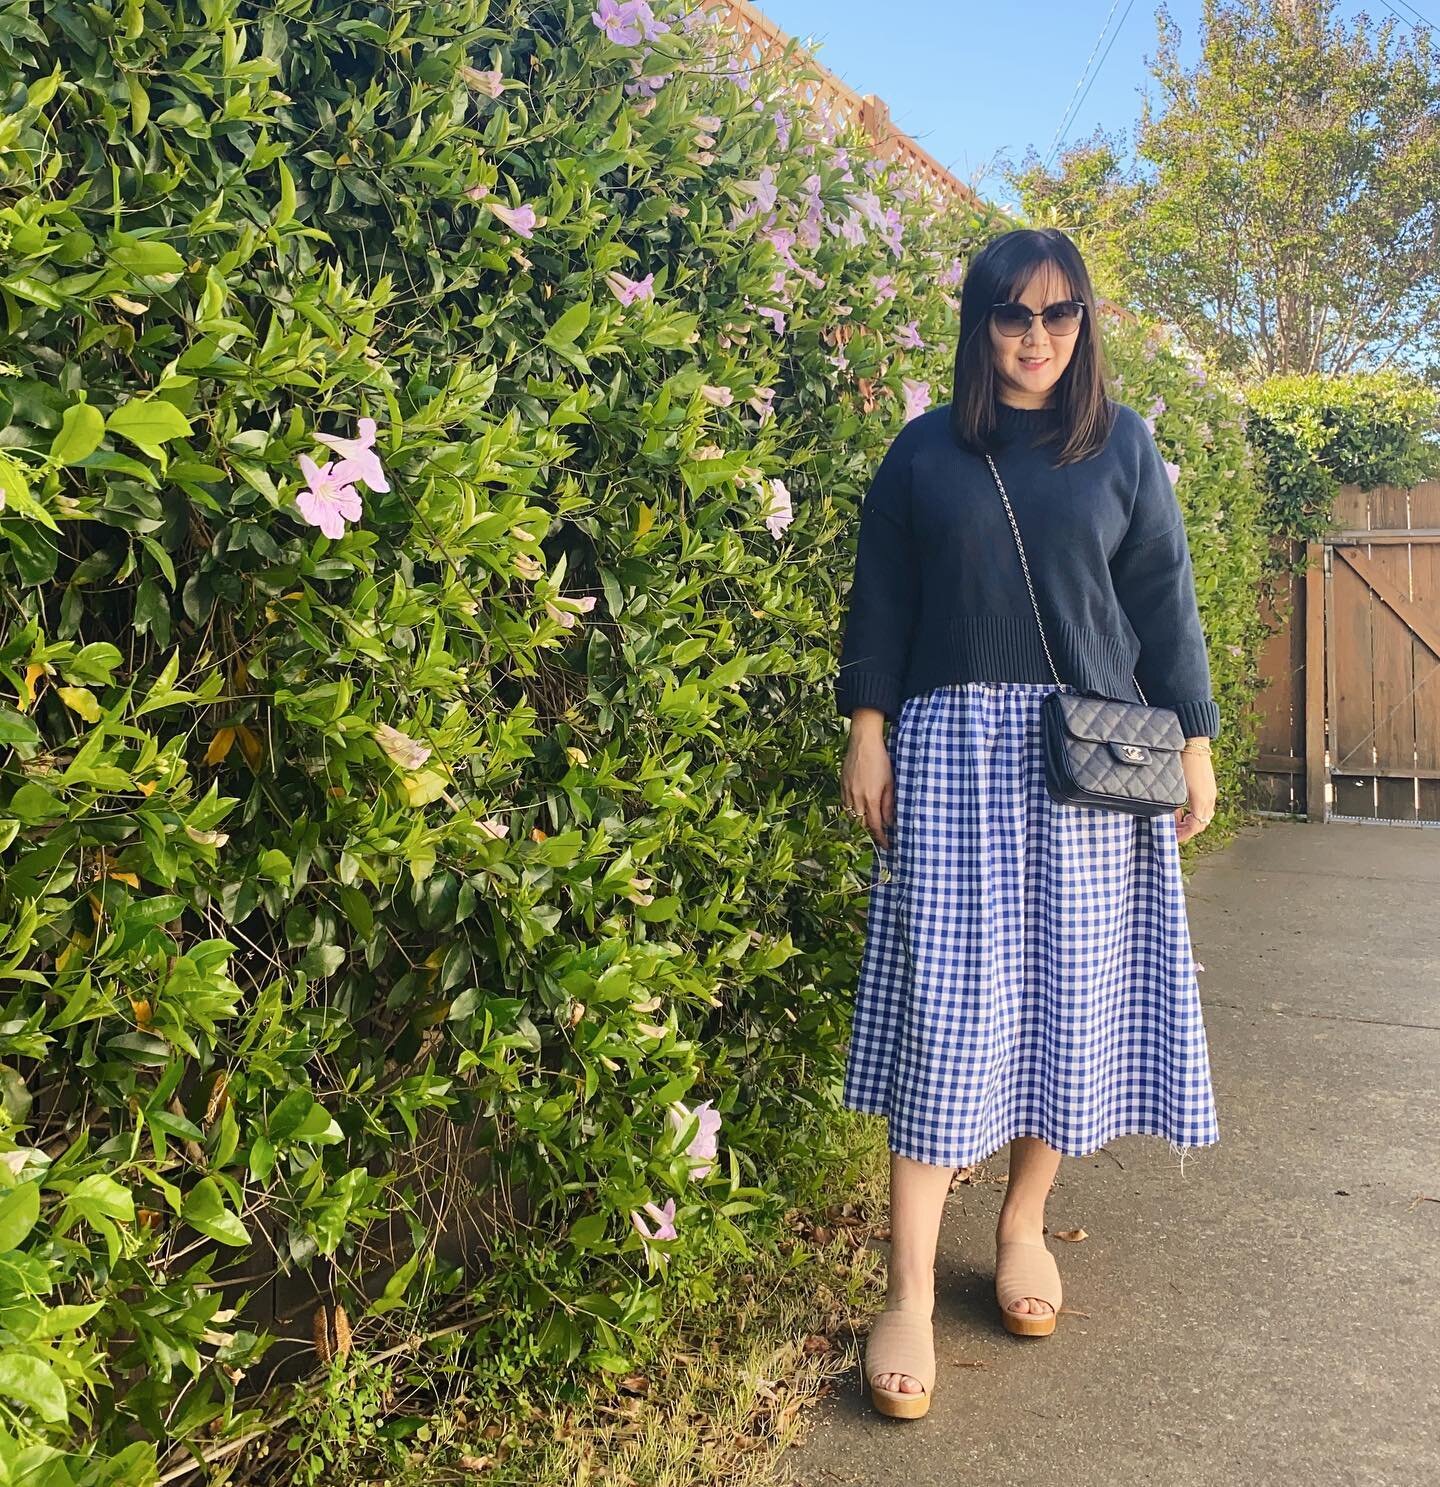 Review of this dress on the blog today ✒️
&mdash;&mdash;&mdash;
Outfit details
Sweater: old @everlane 
Dress: @aprilmeetsoctober via @ebay
Shoes: @beklinawoman 
Bag: @chanelofficial 
.
.
.

 #secondhandfashion #curatedcloset